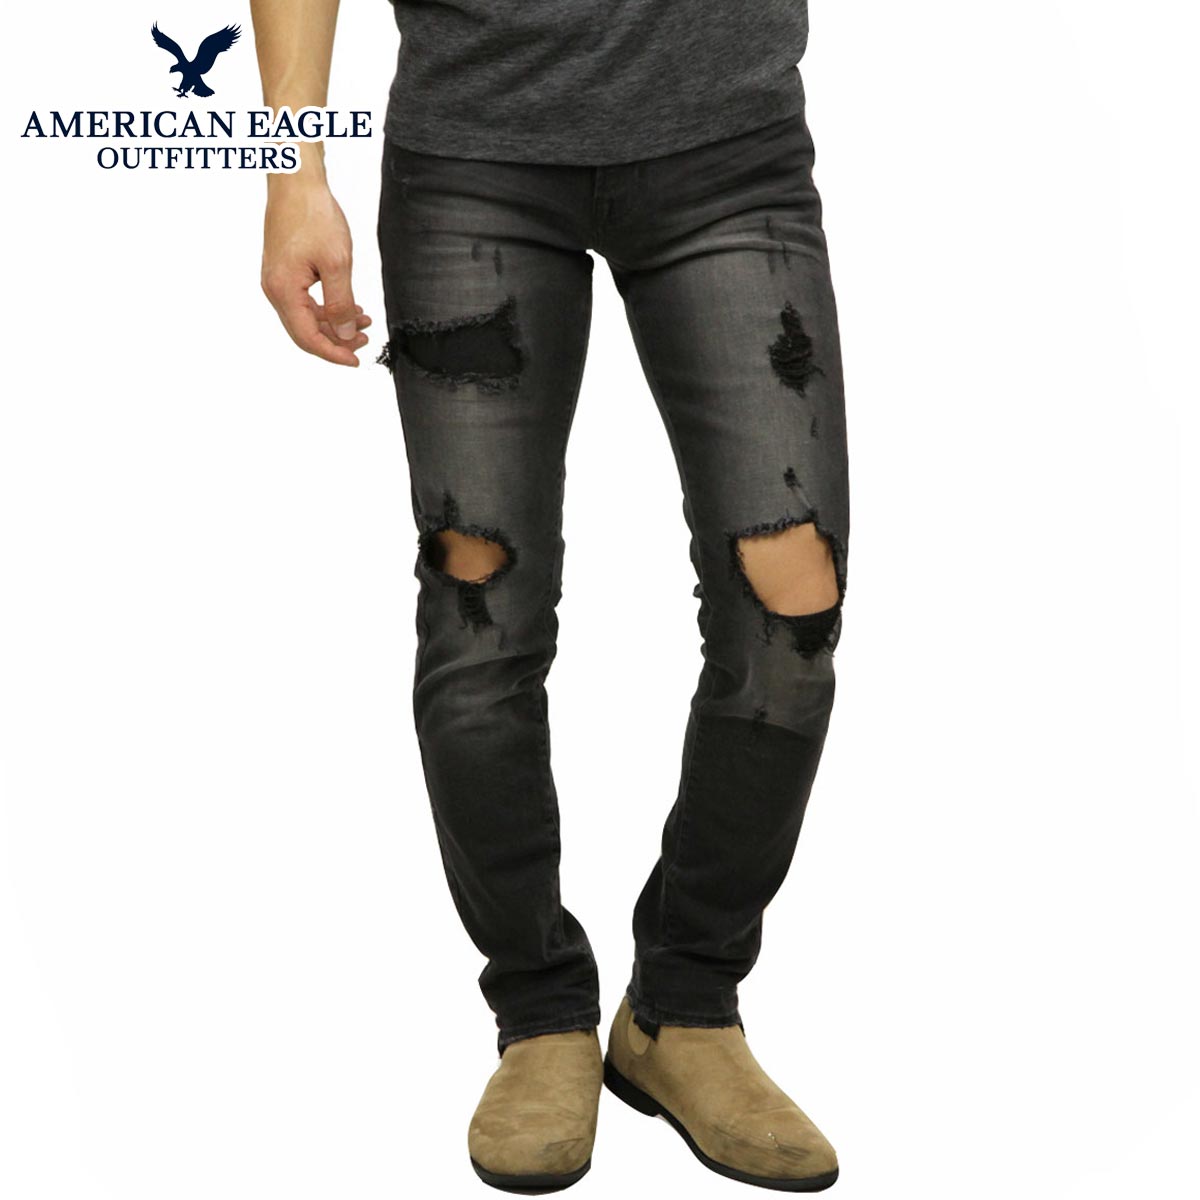 American Eagle Outfitters Jeans Size Chart